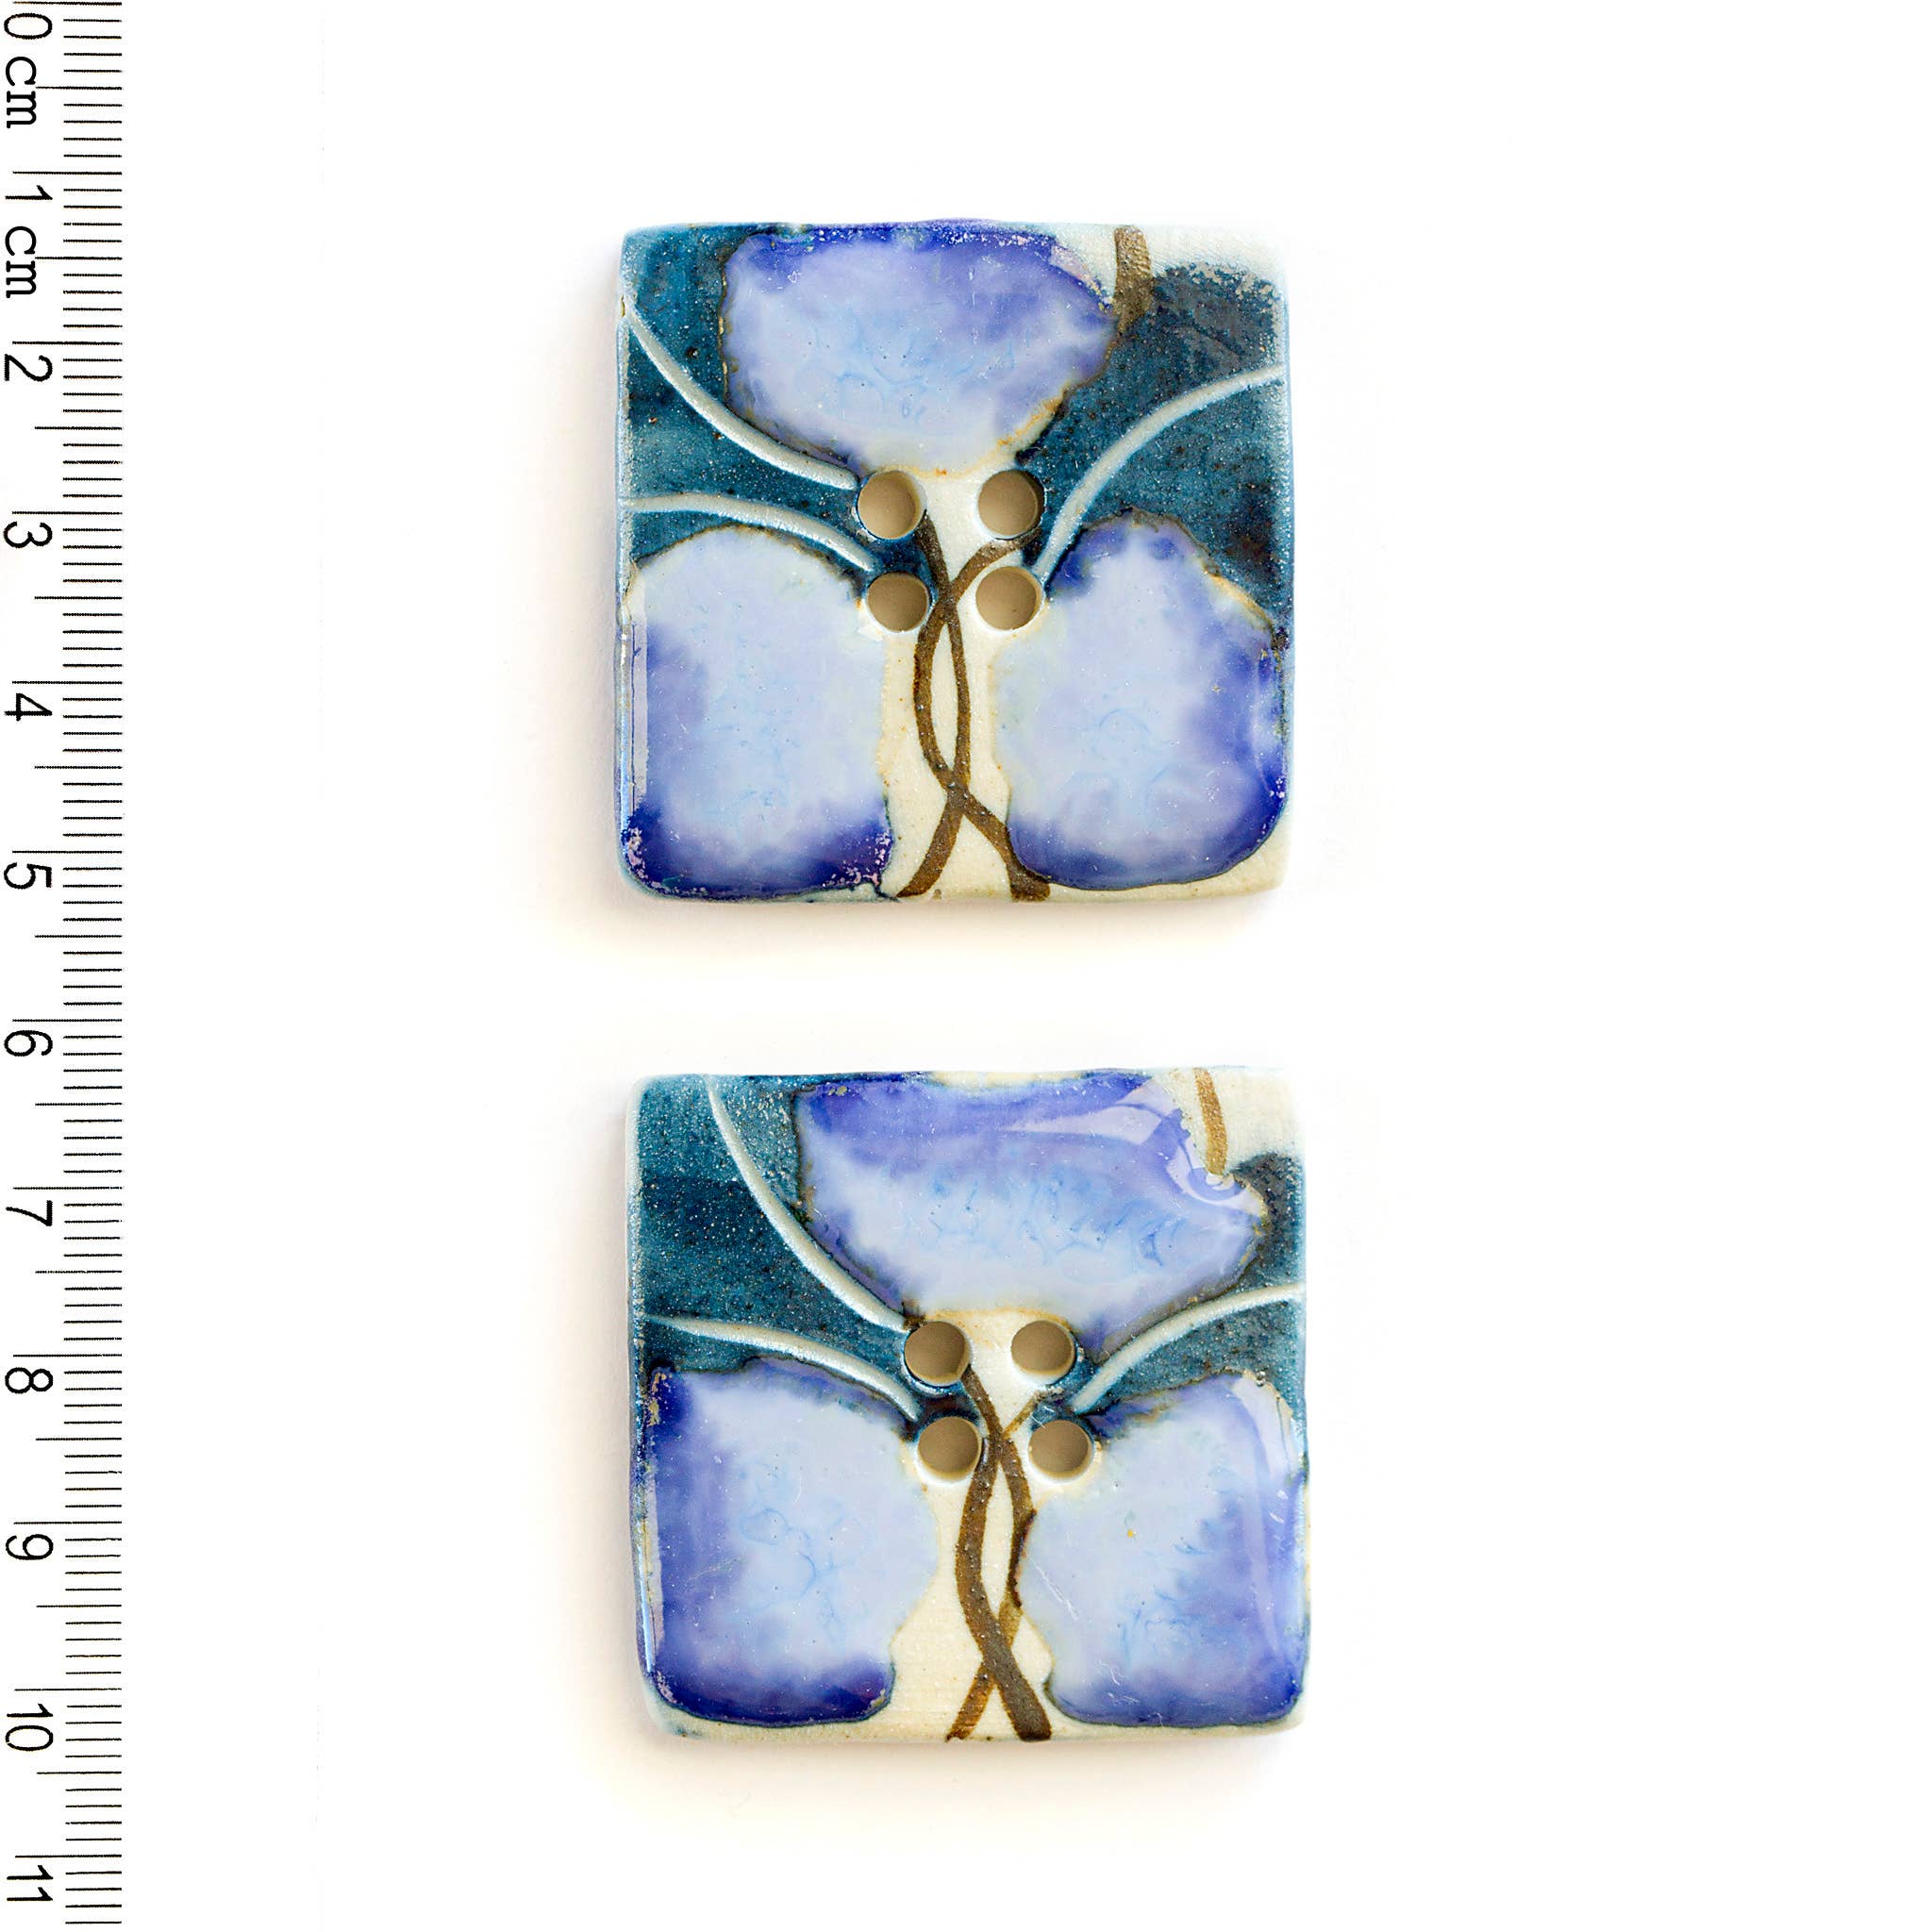 Incomparable Buttons - 2 Large Blue Floral Statement Square Buttons